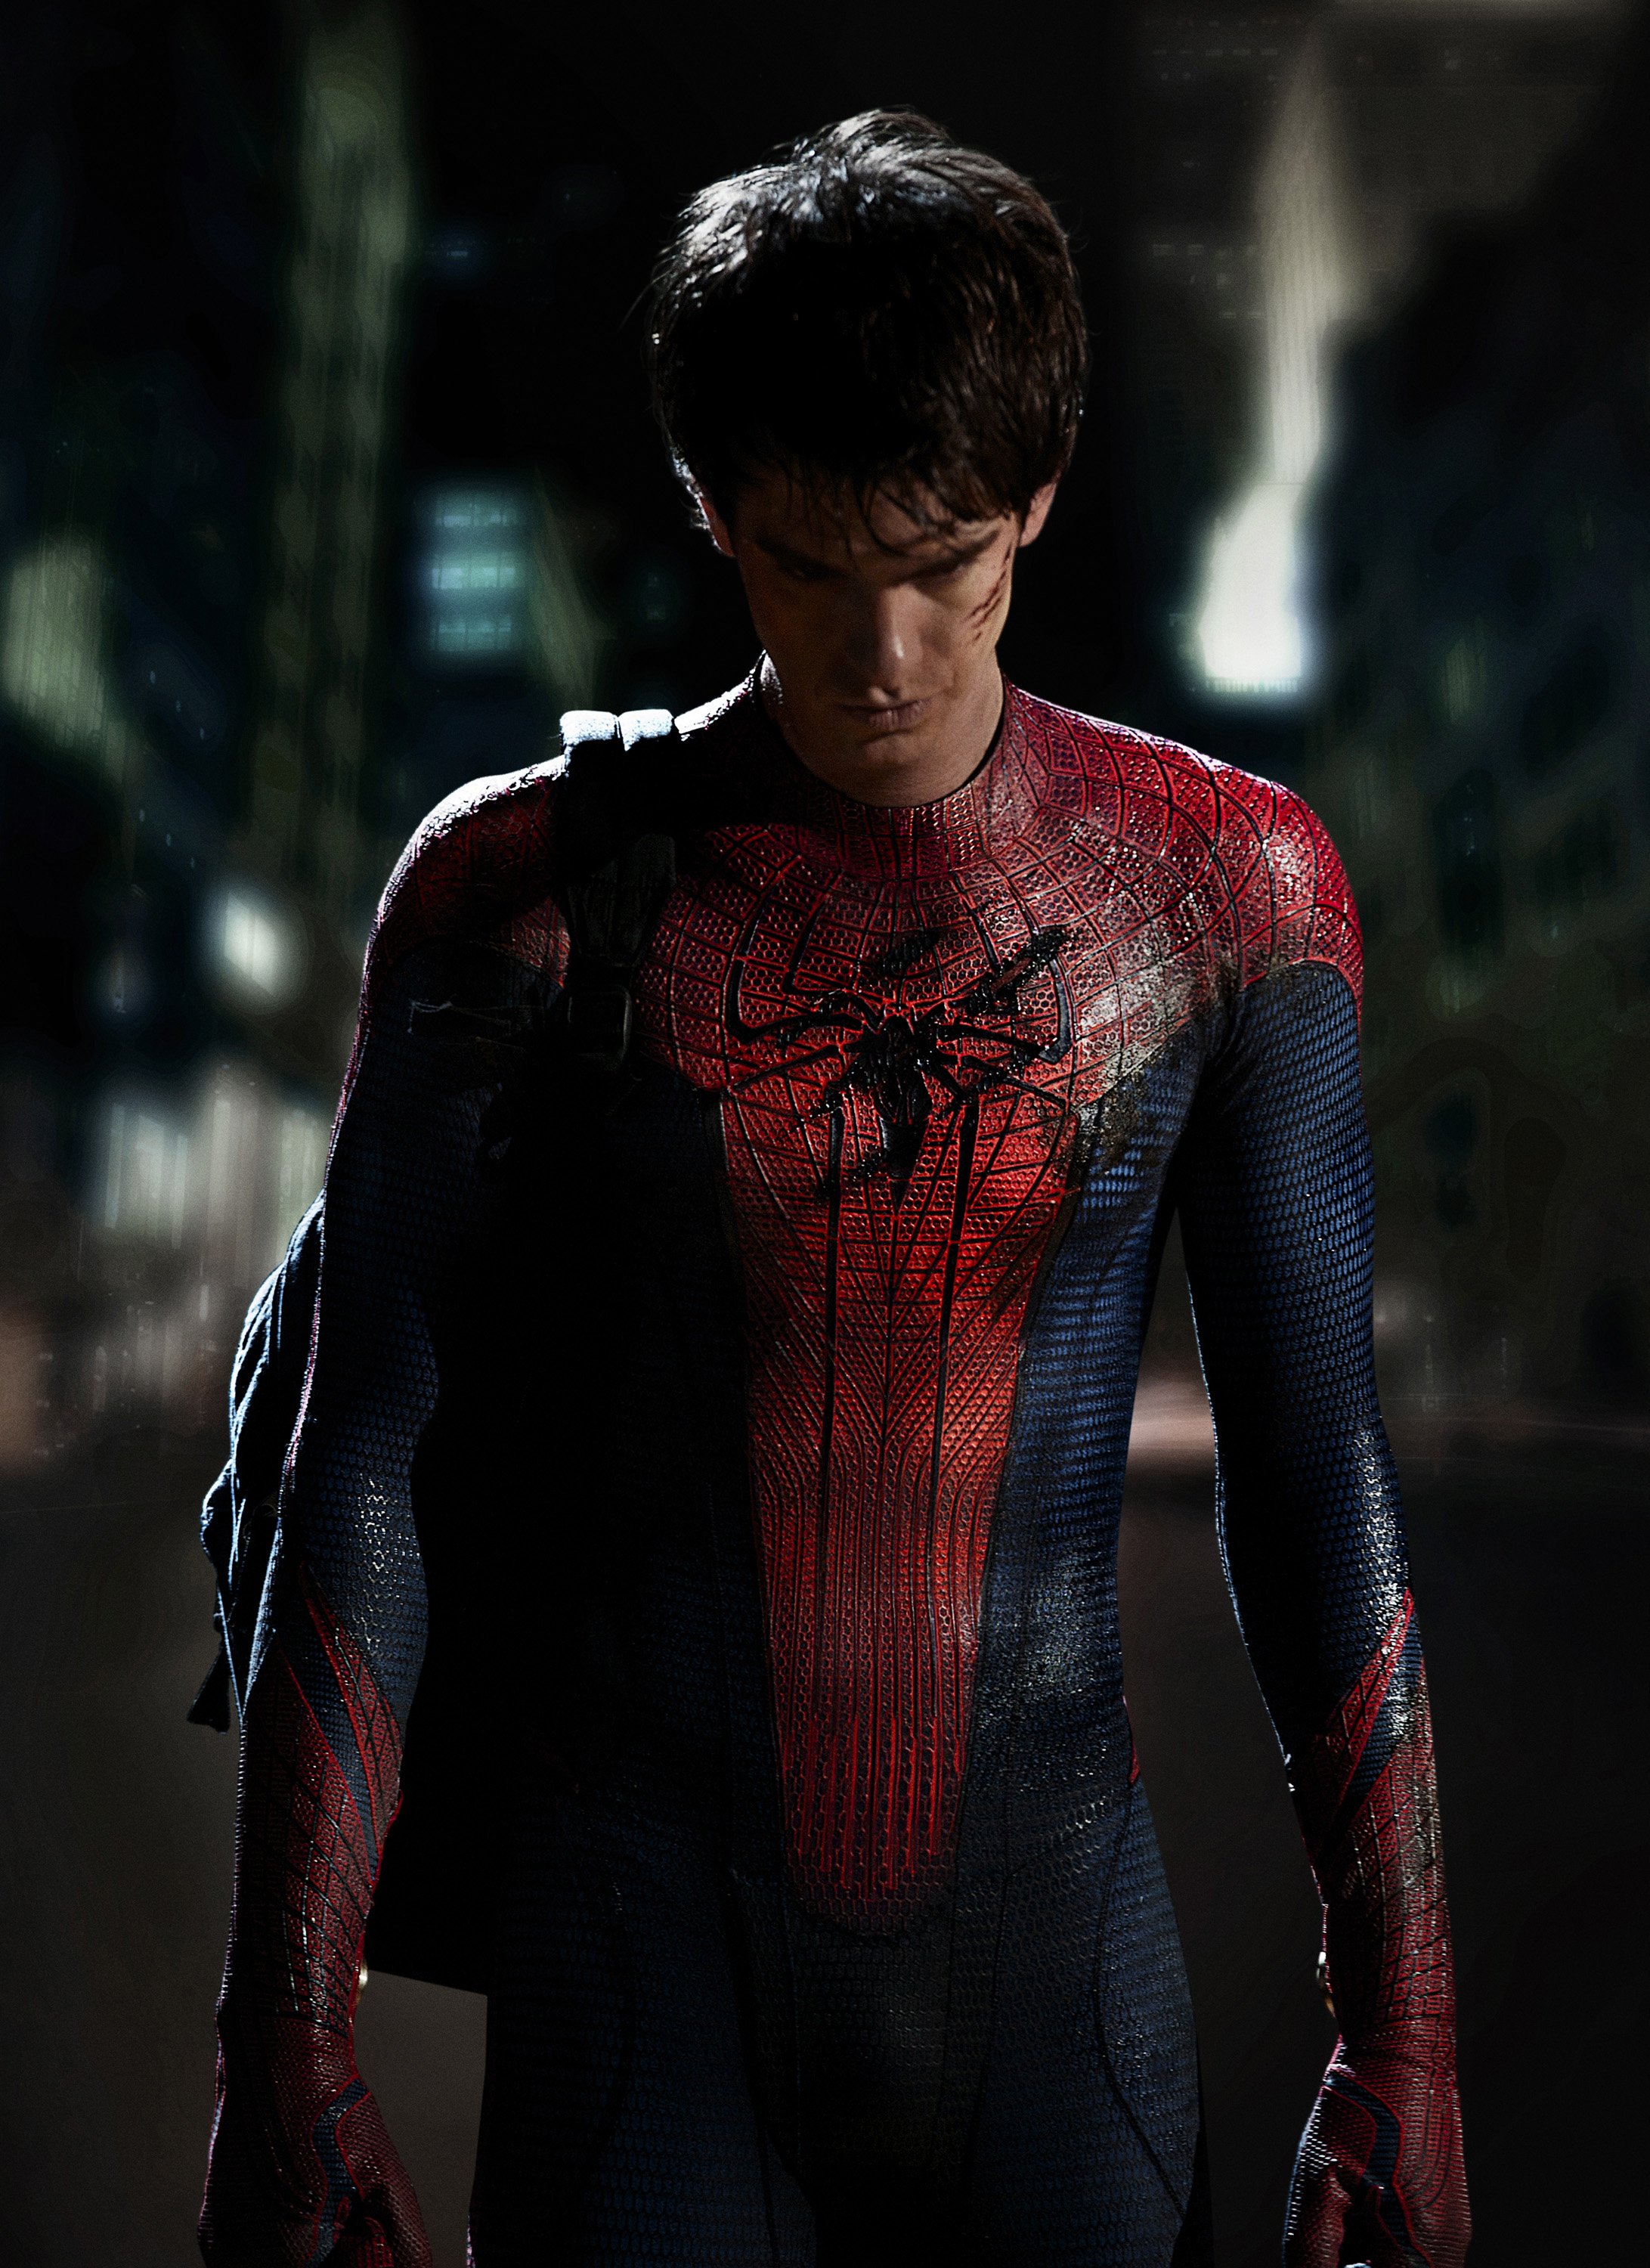 Actor Andrew Garfield as Spider-Man in "The Amazing Spider-Man 2" | Photo: John Schwartzman/Columbia Pictures Industries, Inc. via Getty Images